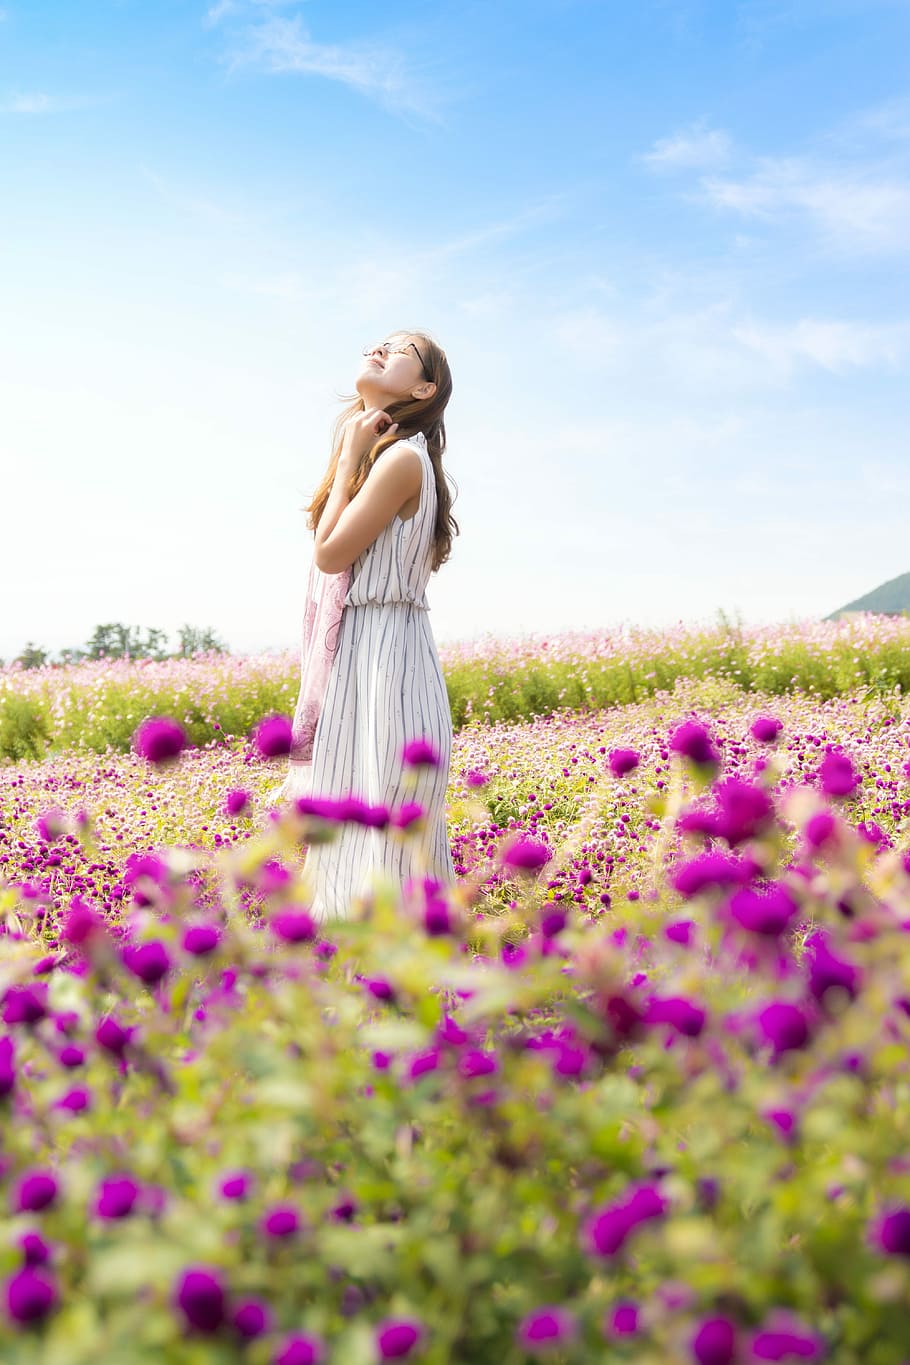 Hd Wallpaper Standing Woman Surrounded By Purple Flowers During Daytime Field Wallpaper Flare